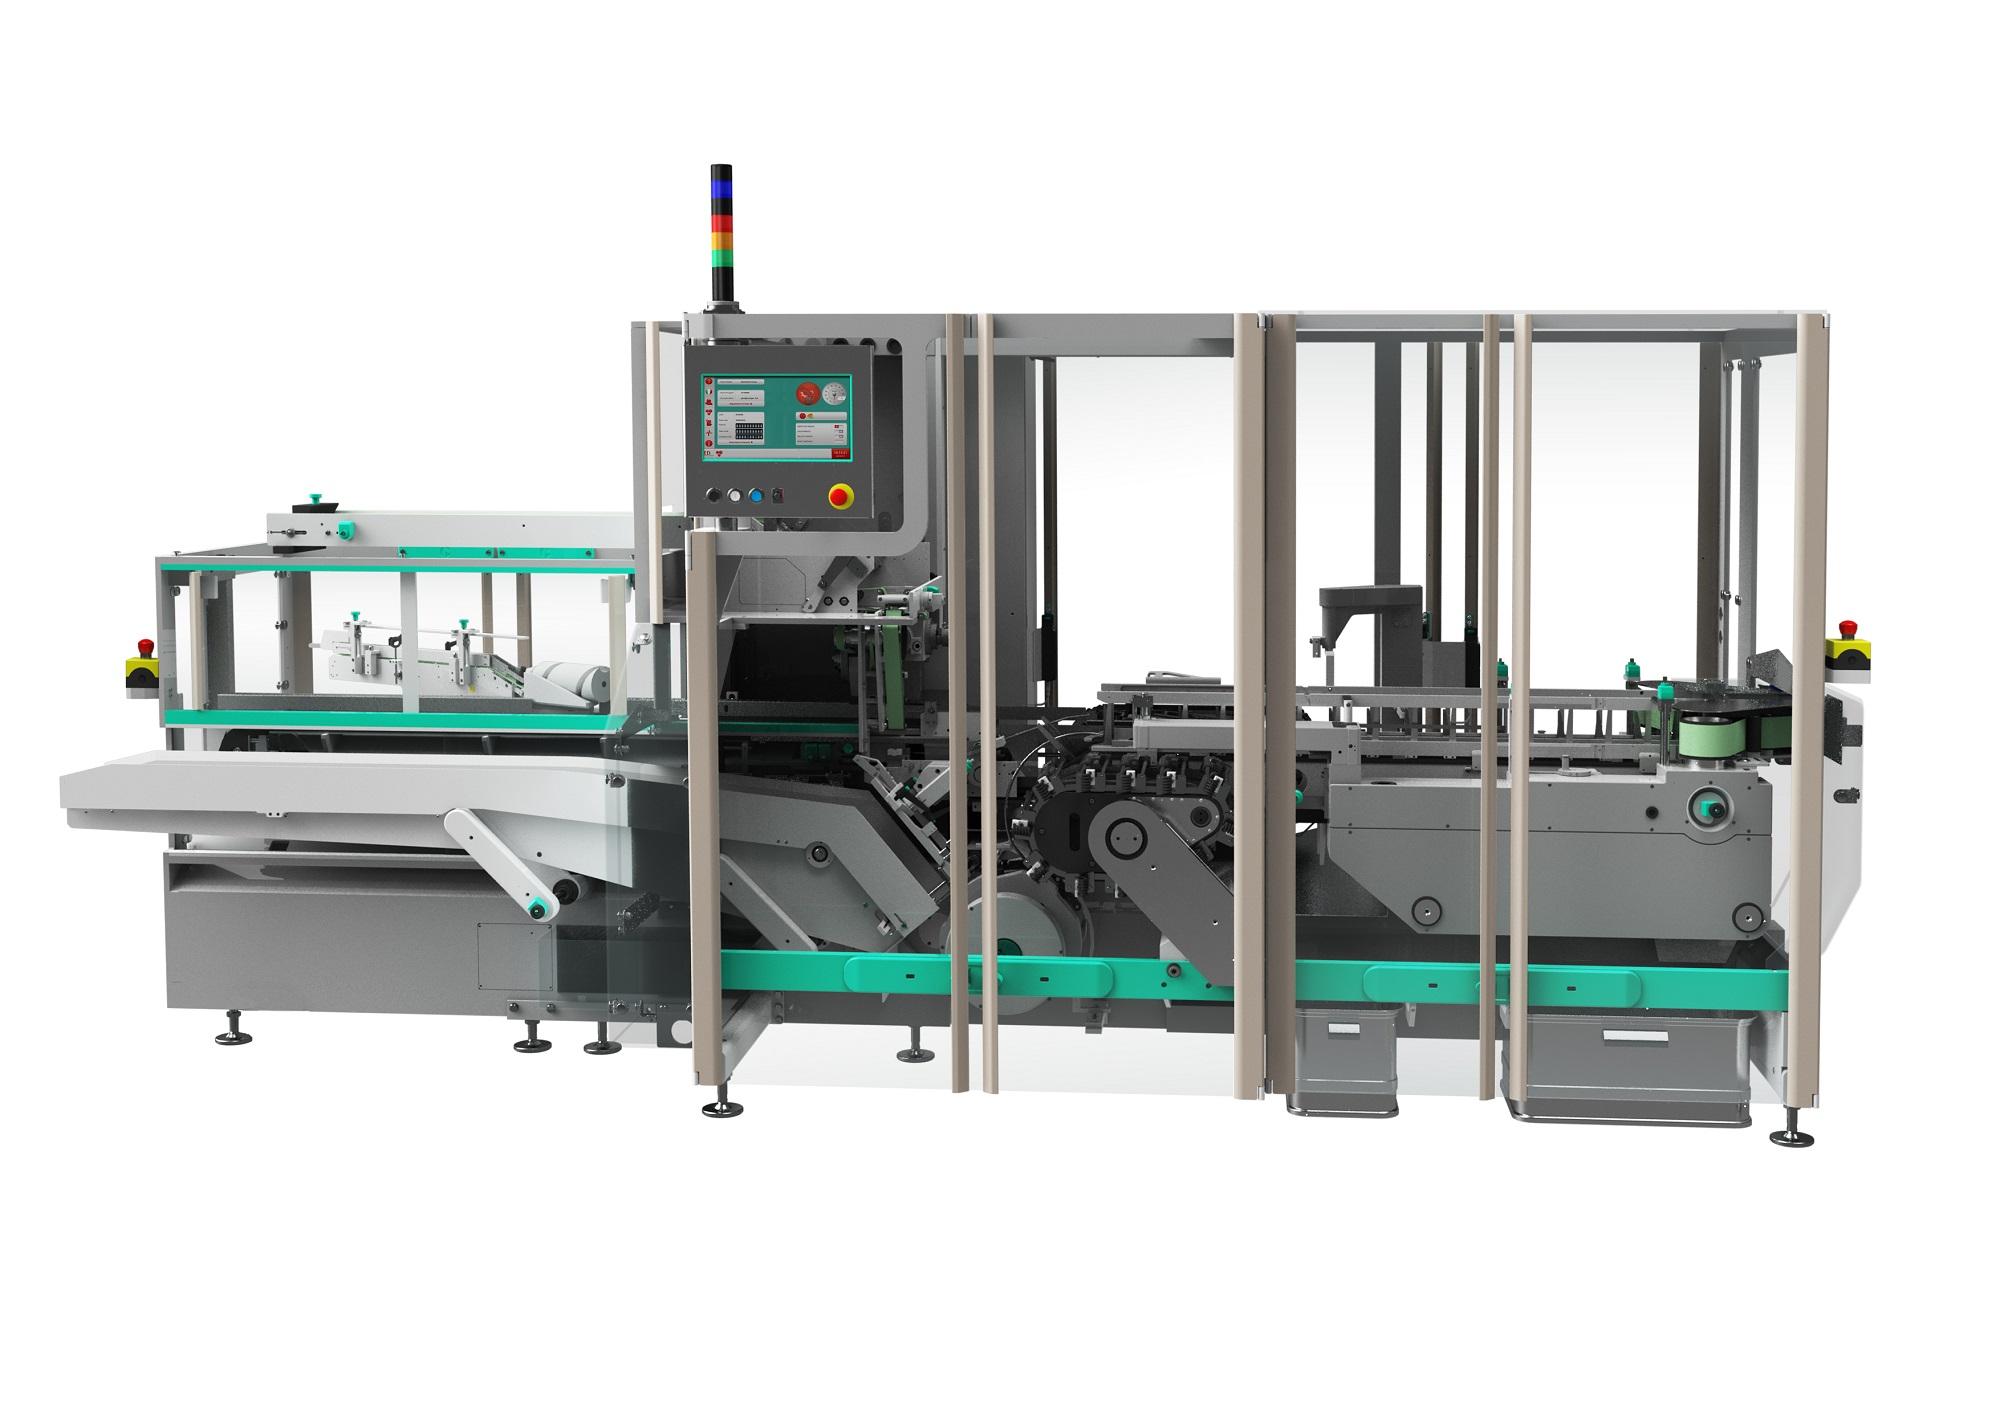 MA 400 CARTONER: A COMPLETELY RESTYLED MACHINE FOR HIGH-SPEED PACKAGING OF ALL PRODUCT TYPES